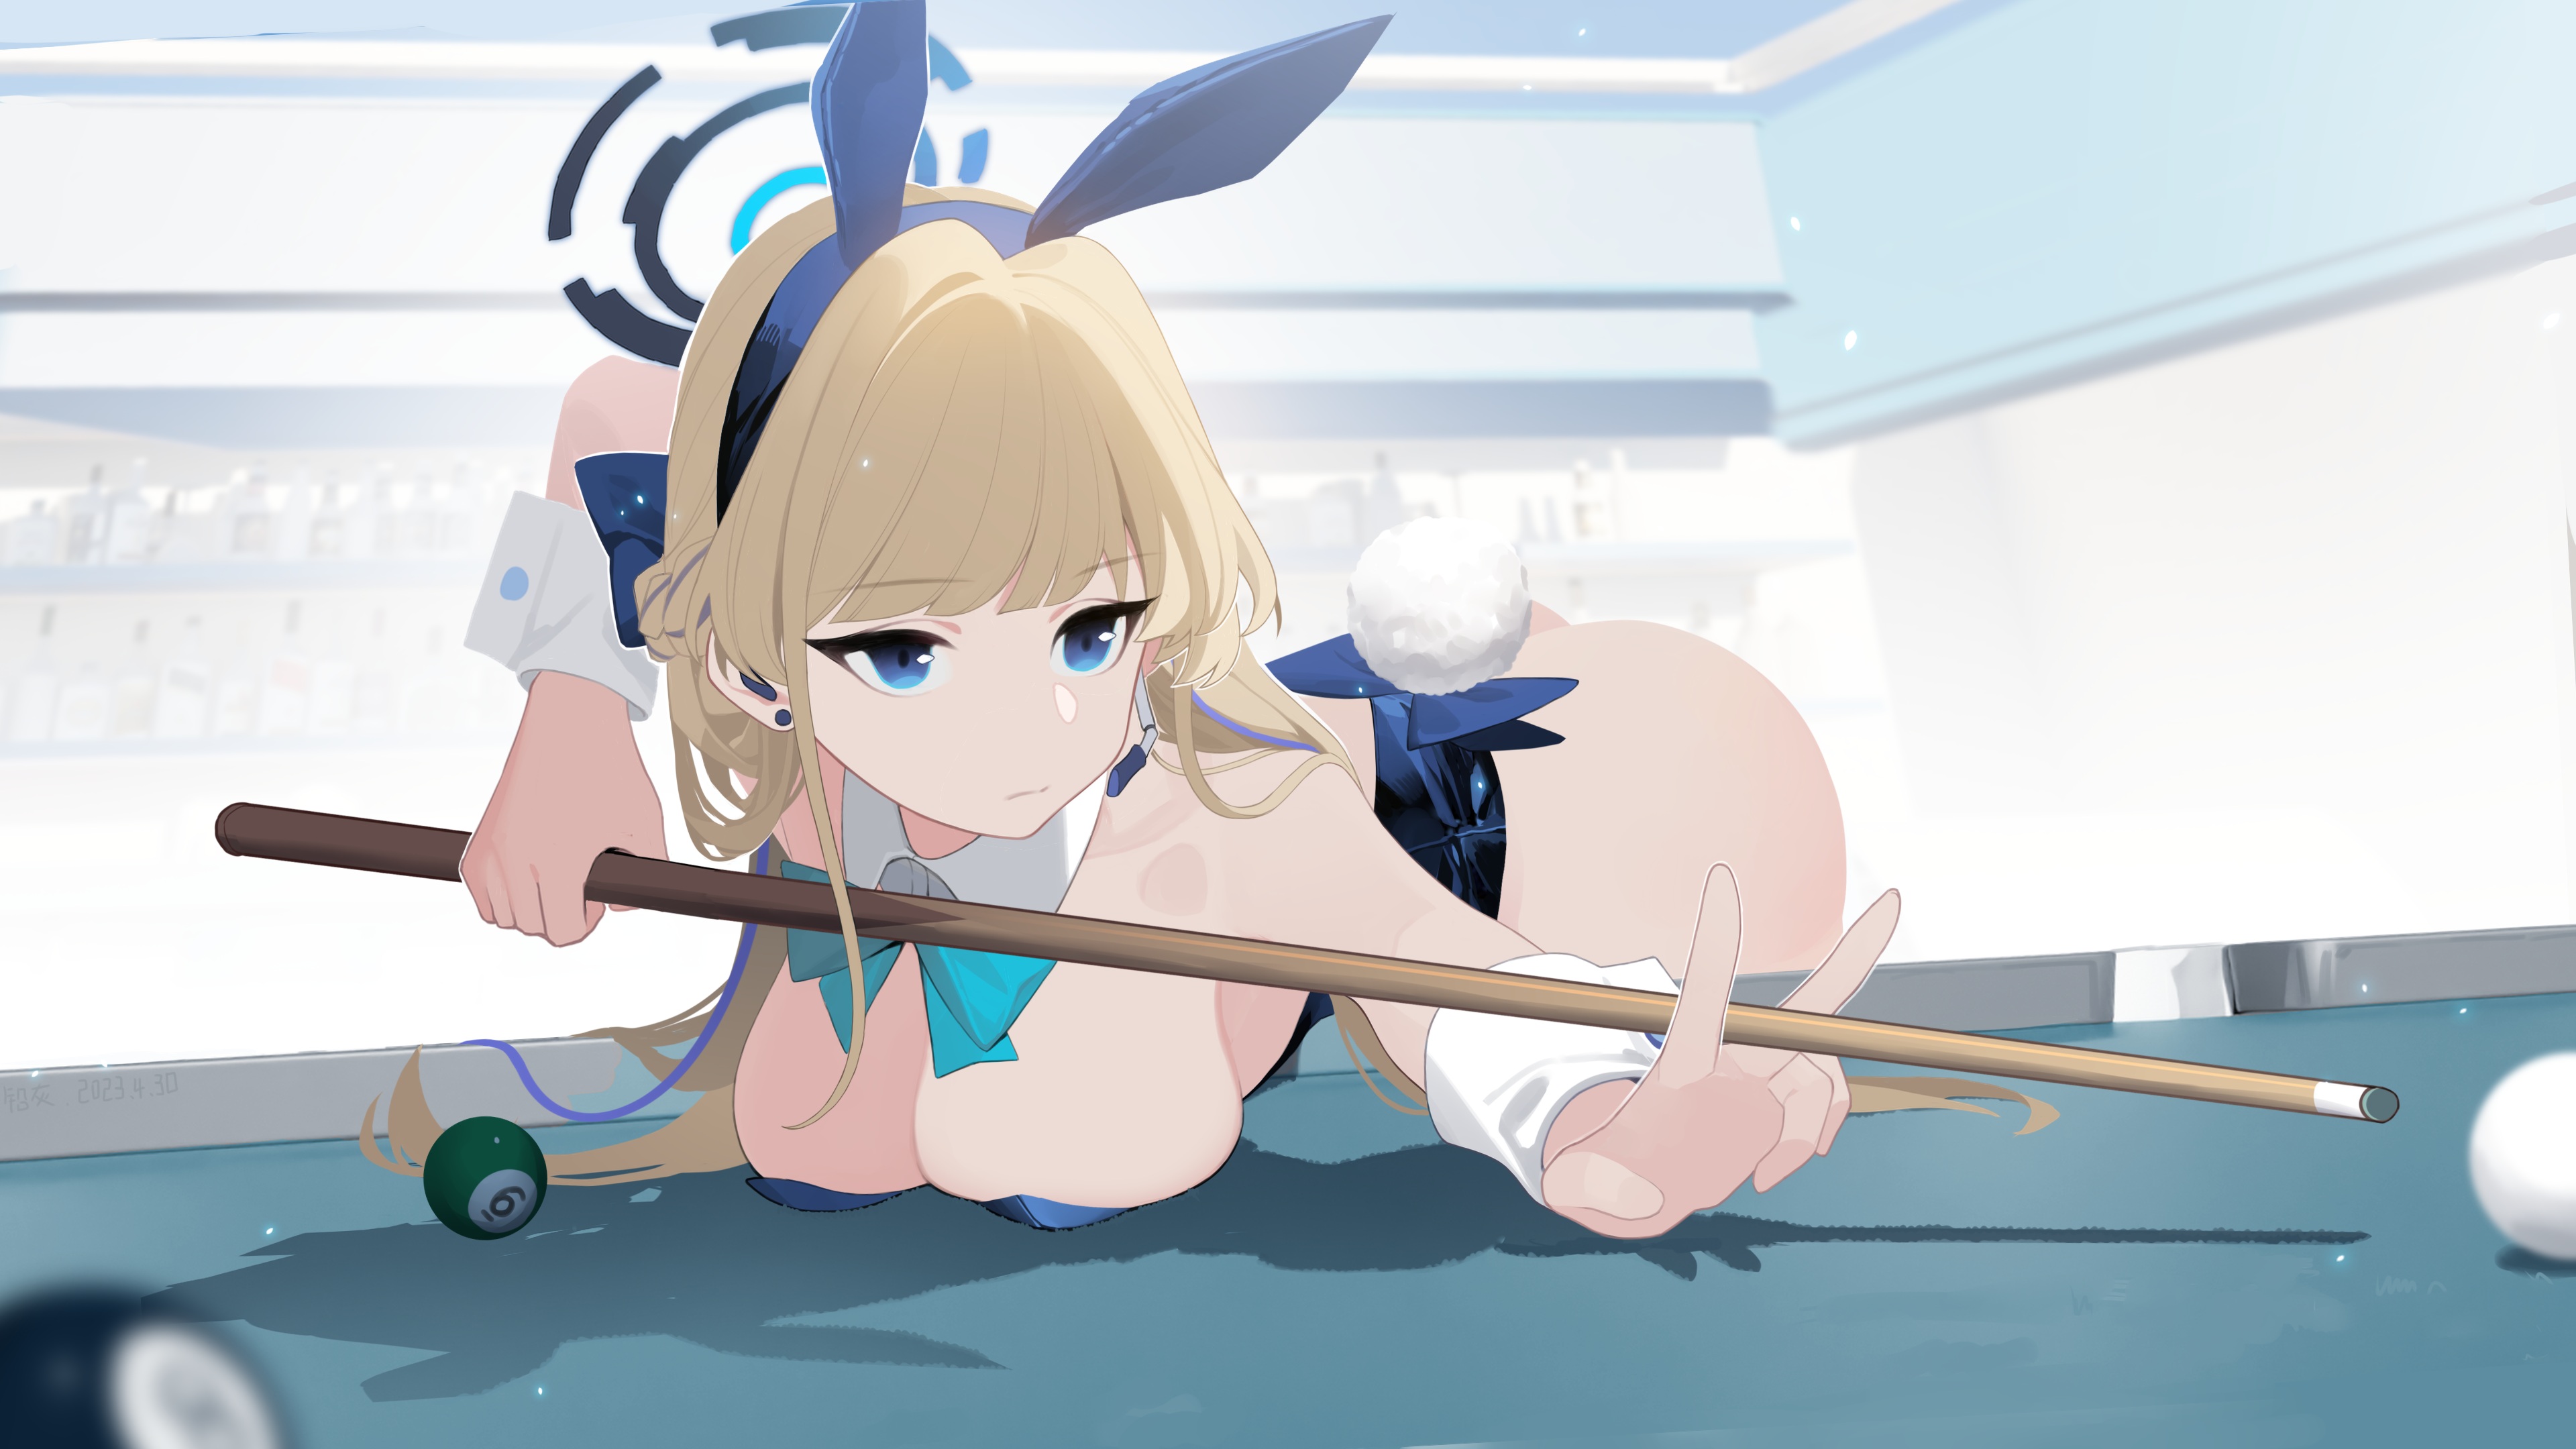 Anime 3840x2160 anime anime girls big boobs bent over Asuma Toki (Blue Archive) Blue Archive qianhui looking away long hair blonde pool table blue eyes blue bow bow tie bunny suit bunny ears bunny tail closed mouth leotard blue leotard ball wrist cuffs cleavage pressed boobs numbers bright boobs on table Pool Cue billiard balls